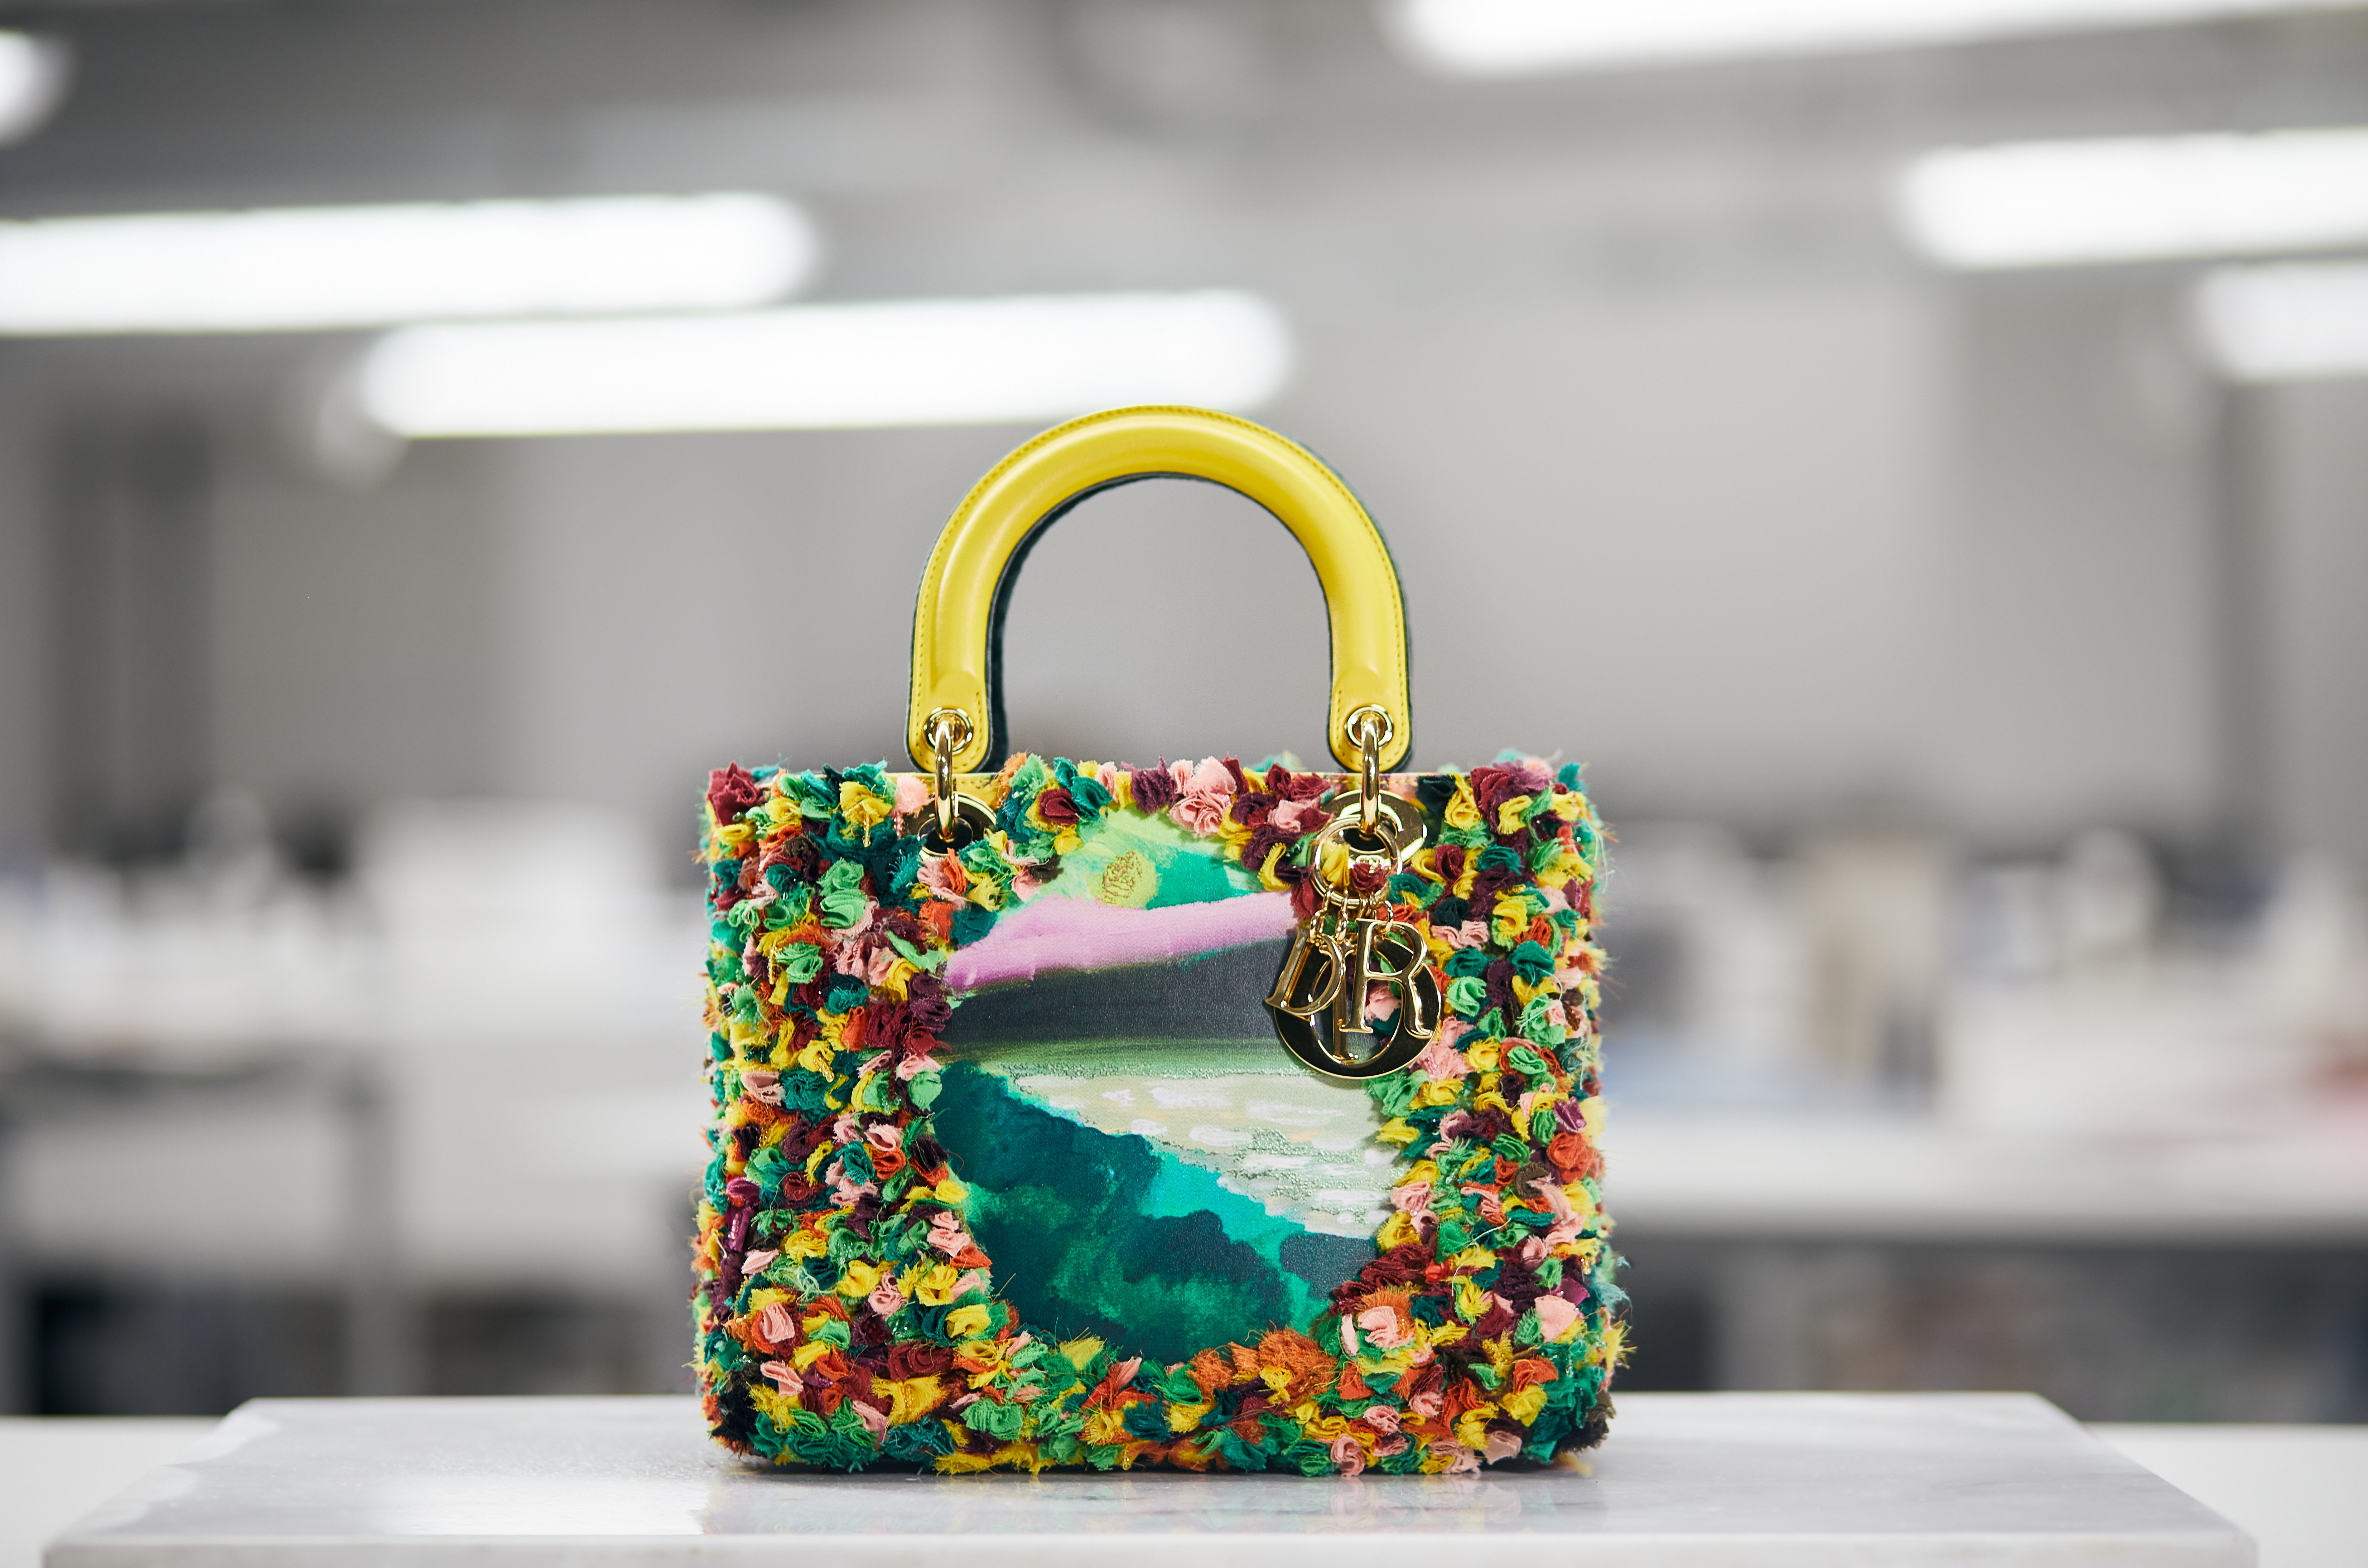 Lady Dior Art 4 11 artists give Diors iconic bag an artistic twist   ICON Singapore